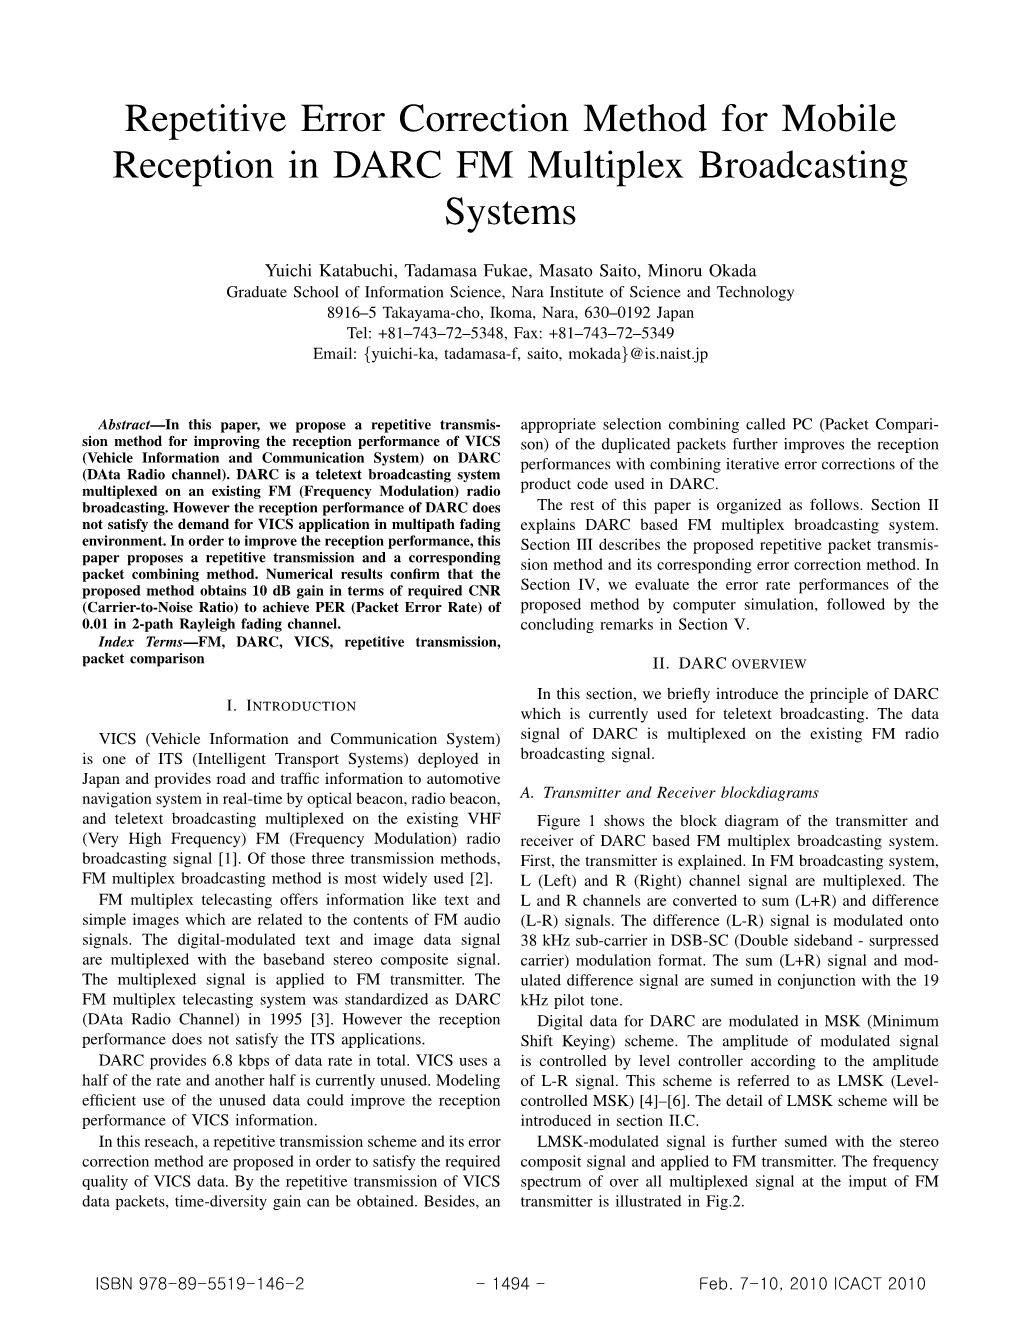 Repetitive Error Correction Method for Mobile Reception in DARC FM Multiplex Broadcasting Systems